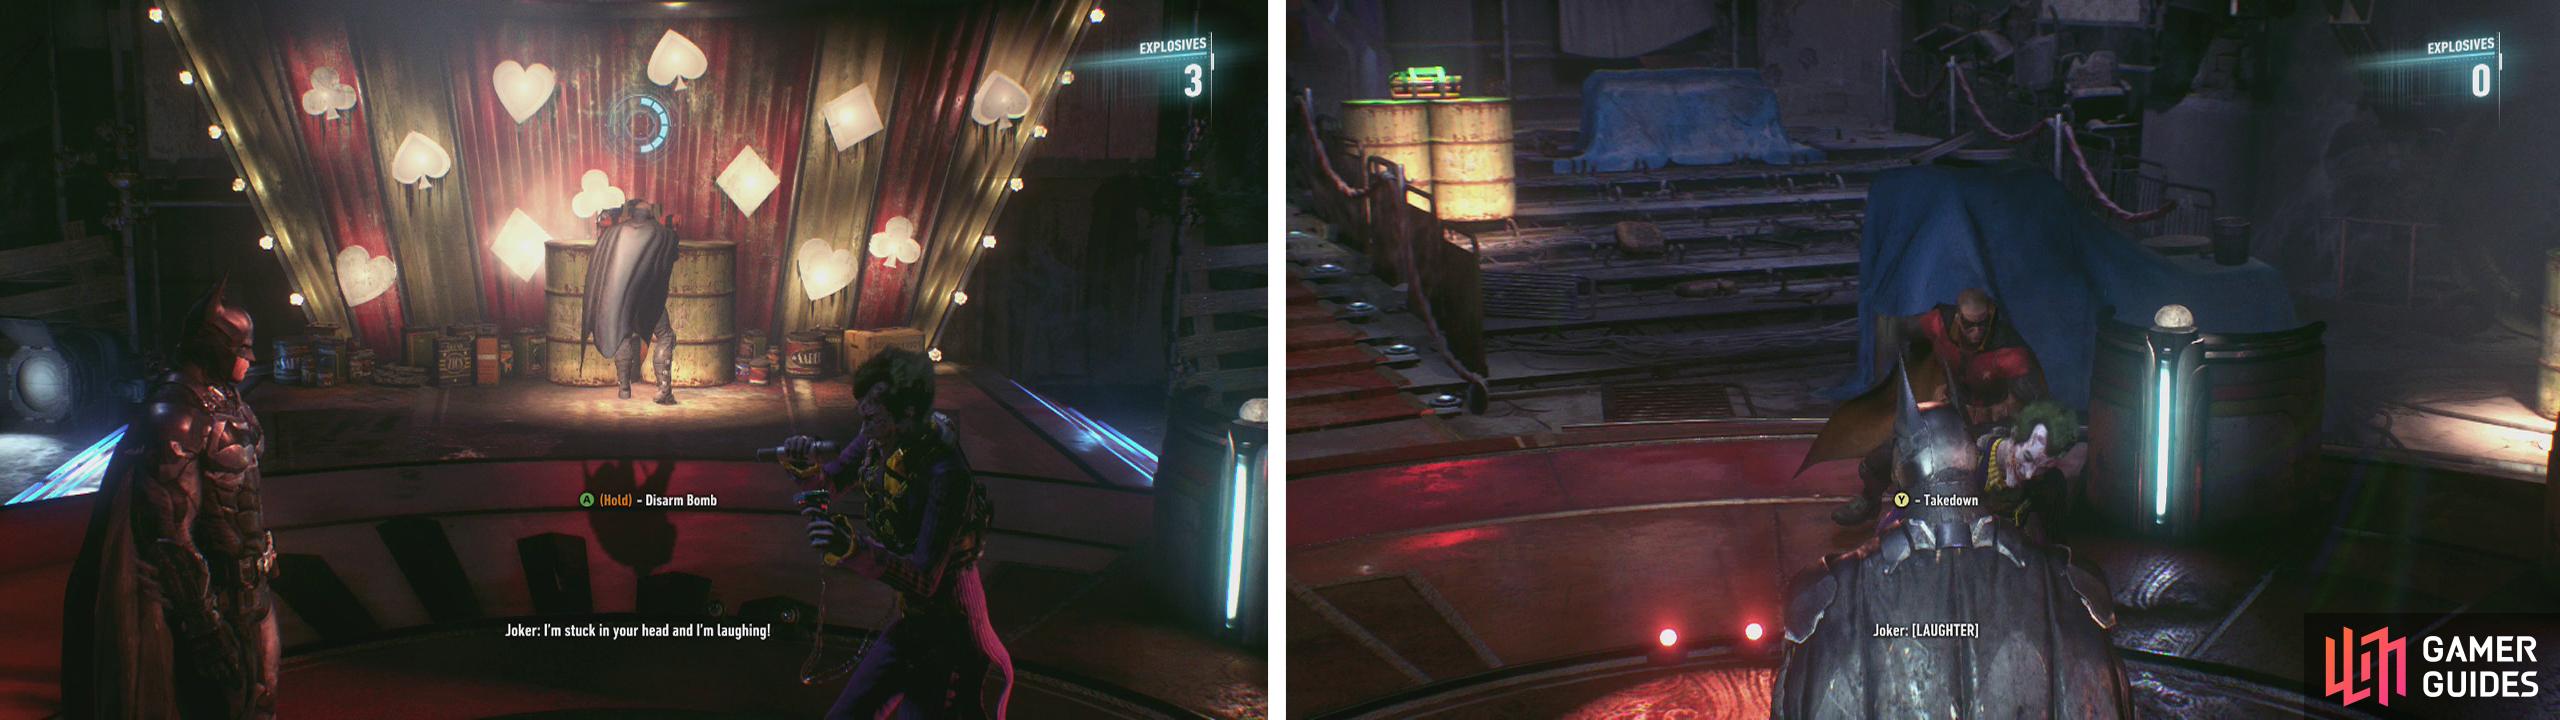 Walk around the room and disarm all the bombs (left) and then sneak up and perform a takedown (right).